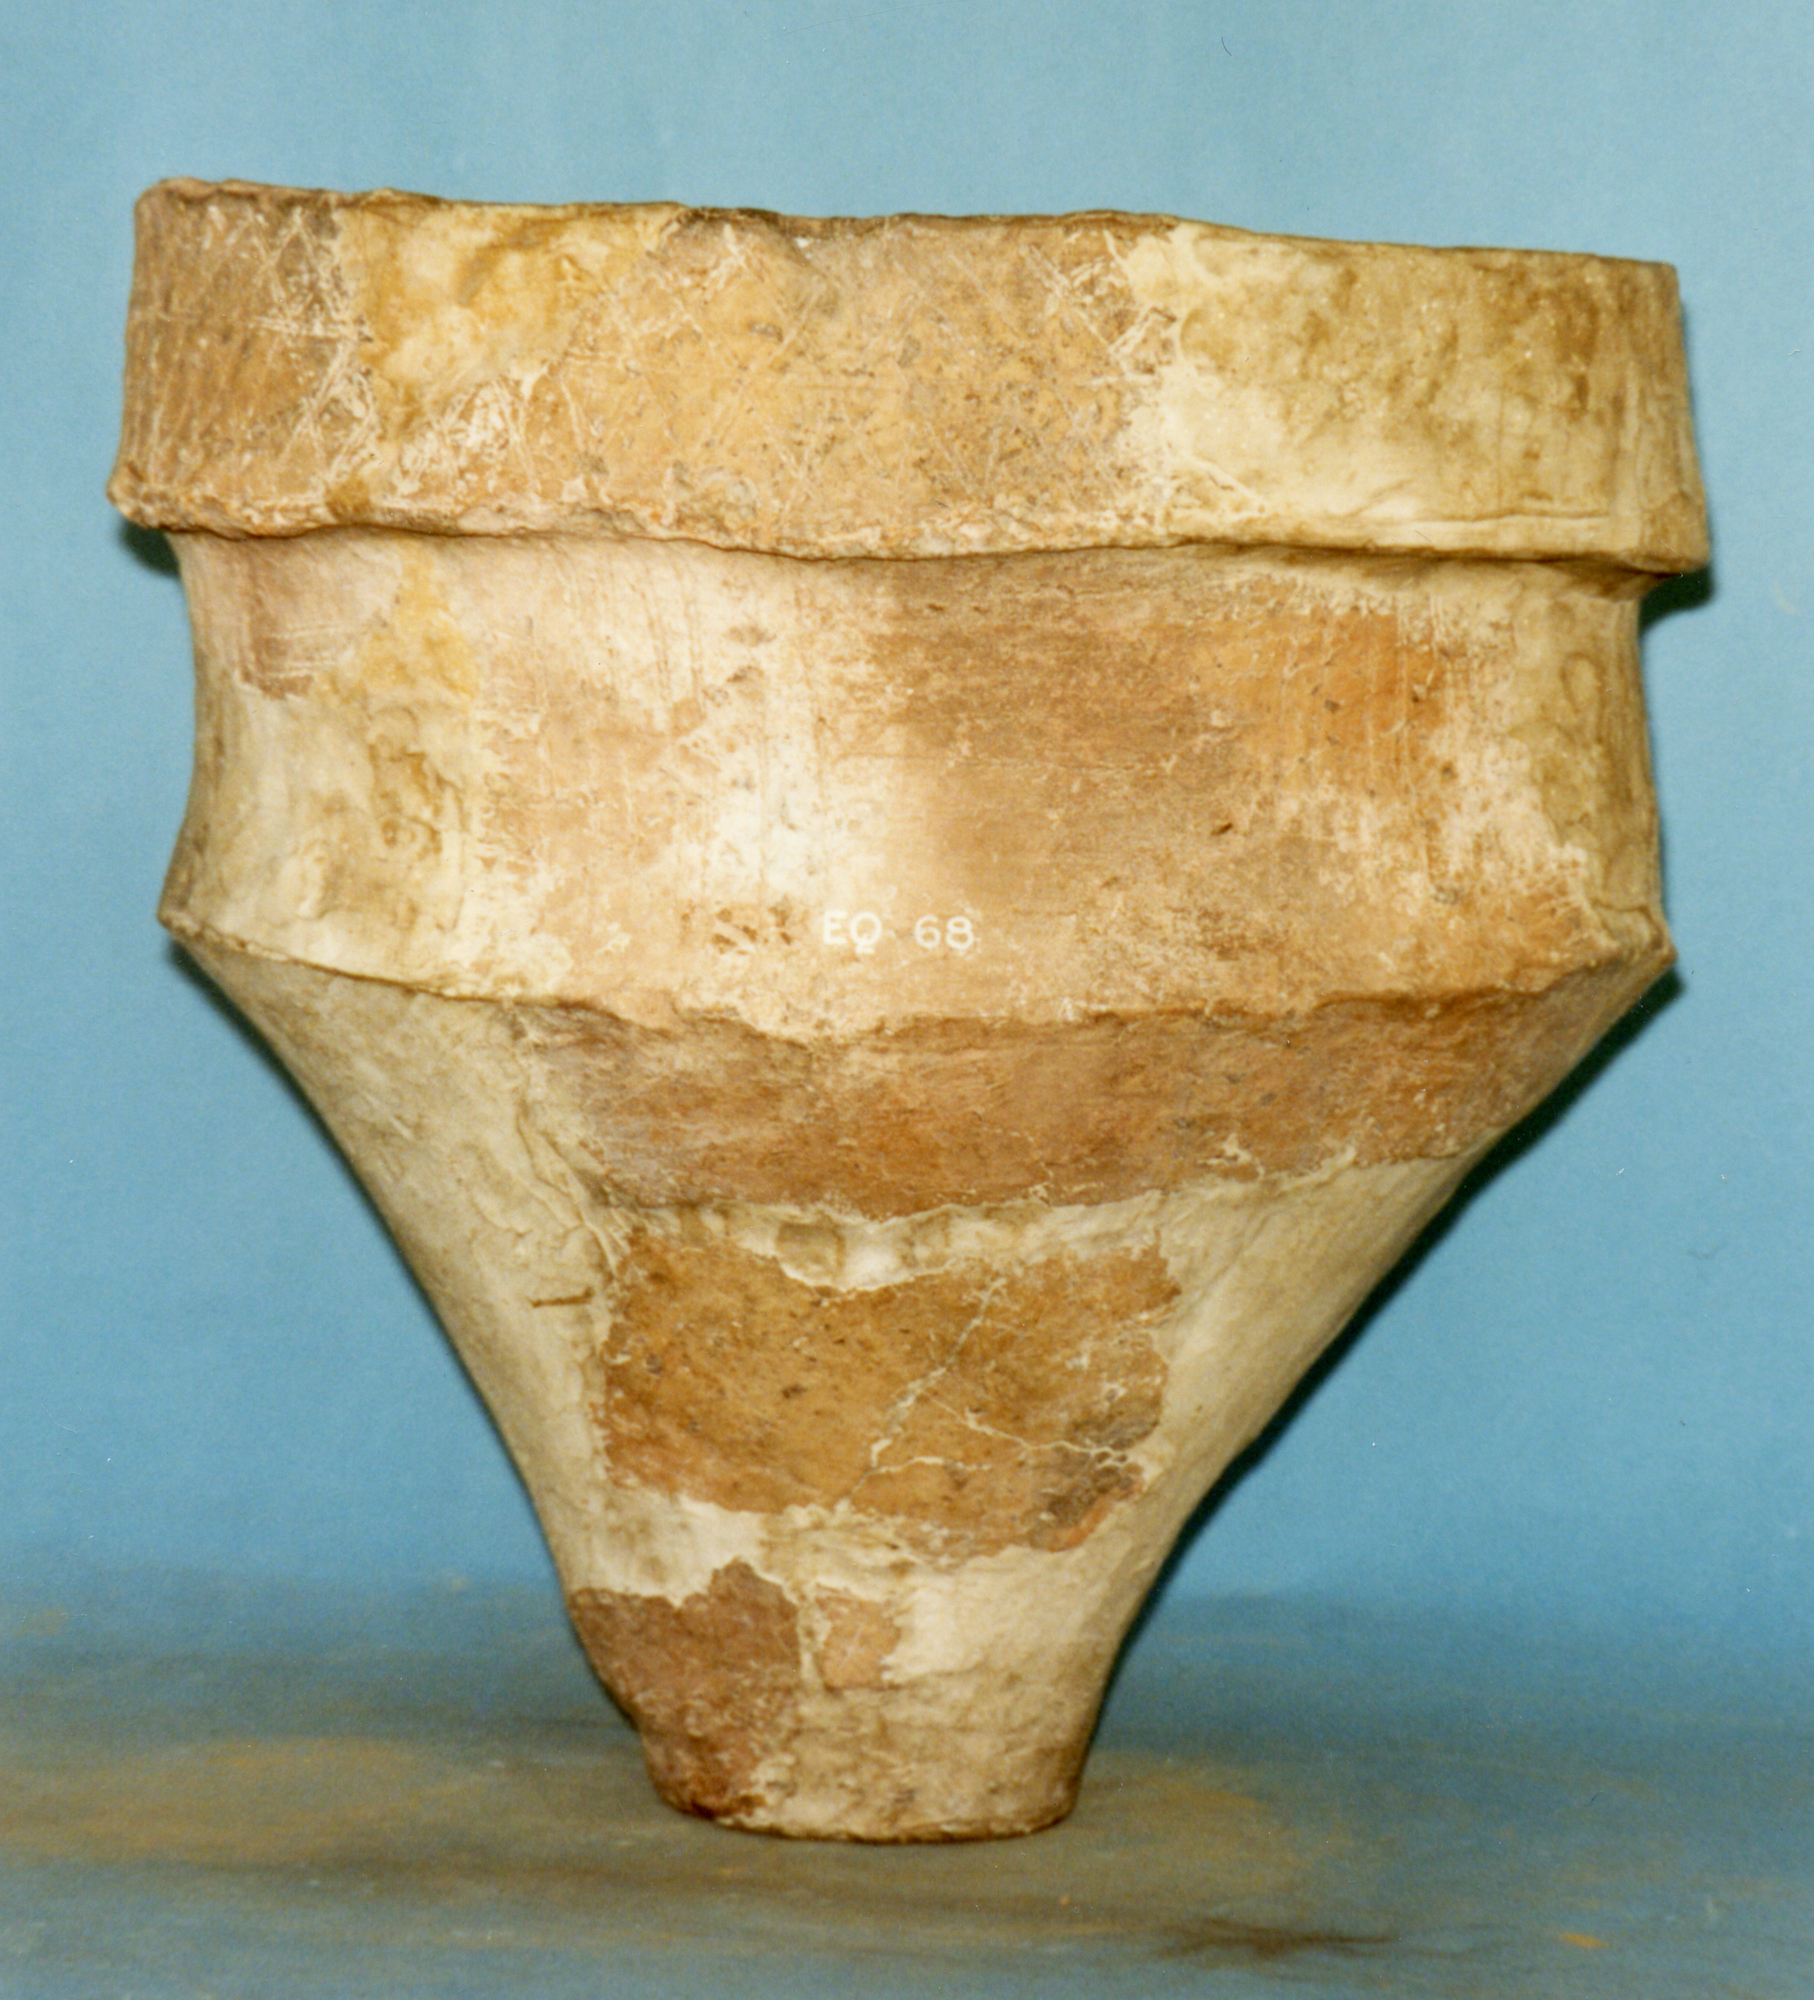 Image of Cinerary urn, from Meiklerigg, Stenton, East Lothian © National Museums Scotland